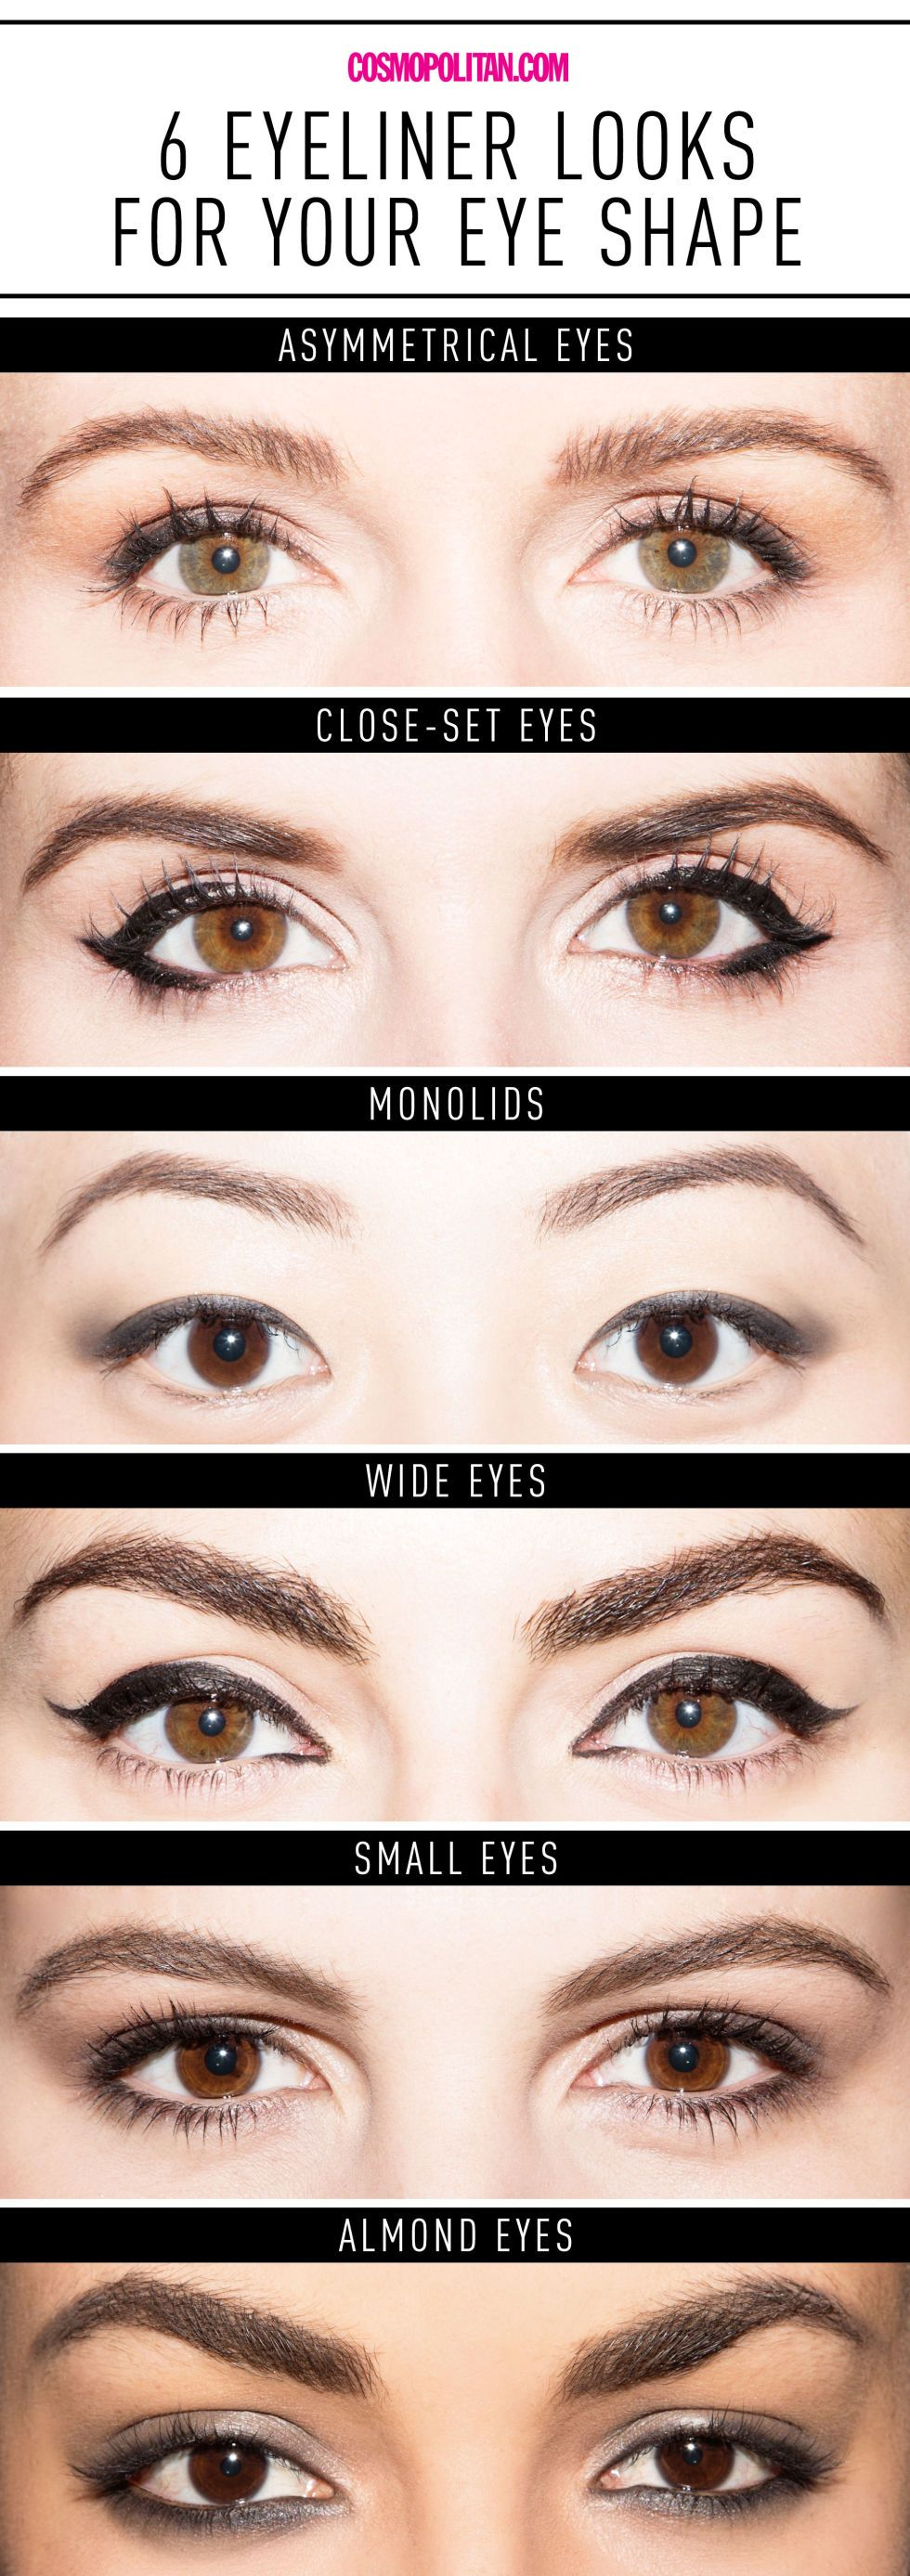 Makeup For Different Eye Shapes 6 Ways To Get The Perfect Eyeliner Look For Your Eye Shape In 1